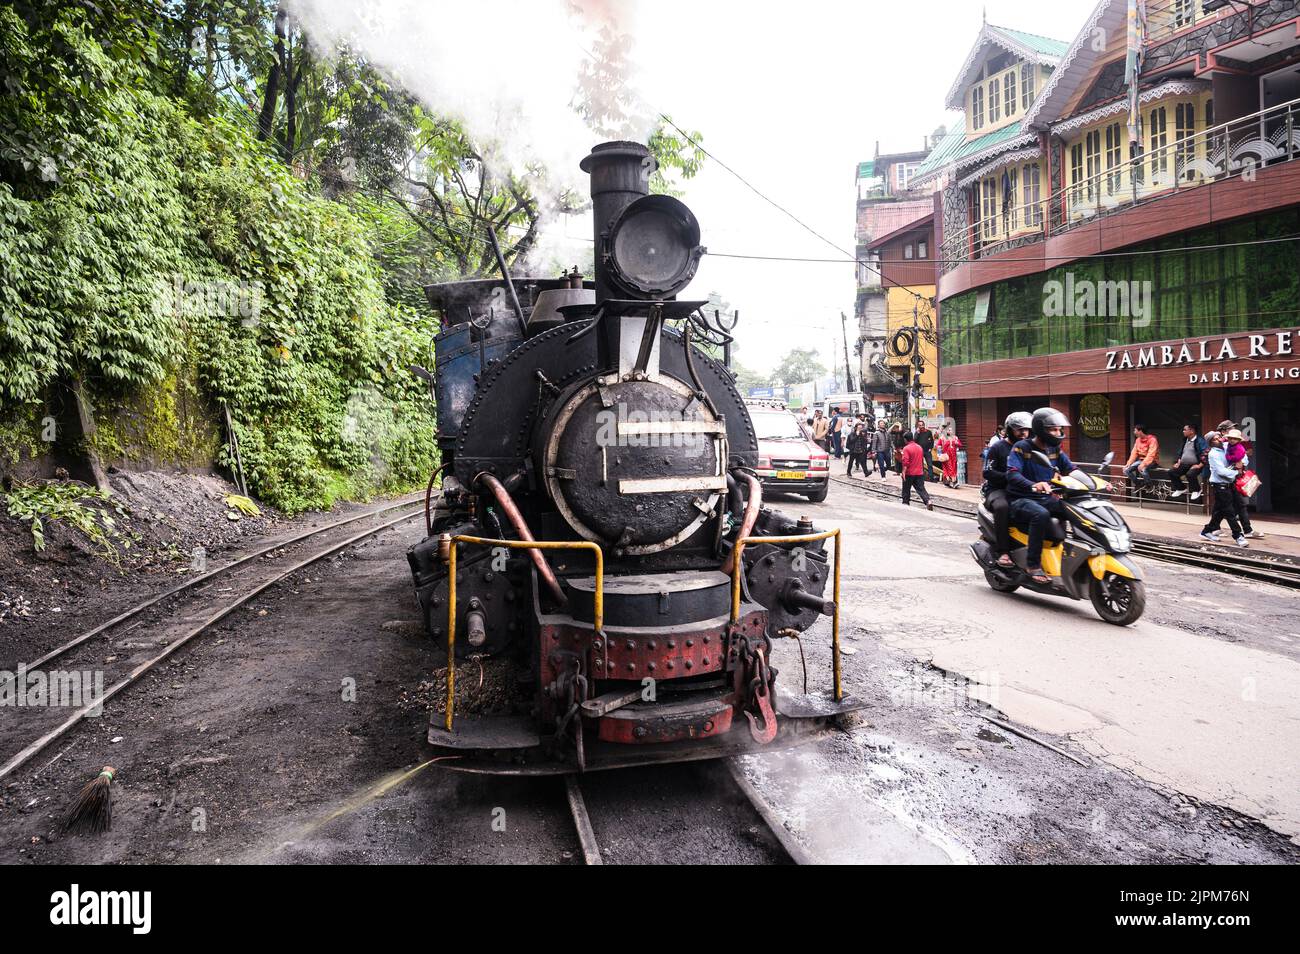 The Darjeeling Himalayan Railway, a UNESCO World Heritage Site,  also known as the DHR or the Toy Train, is a 610 mm gauge railway that runs between New Jalpaiguri and Darjeeling in the Indian state of West Bengal. It climbs from about 100 m above sea level at New Jalpaiguri to about 2,200 m (7,200 ft) at Darjeeling, using six zig zags and five loops to gain altitude. Six diesel locomotives handle most of the scheduled service, with daily tourist trains from Darjeeling to Ghum – India's highest railway station – and the steam-hauled Red Panda service from Darjeeling to Kurseong. Stock Photo